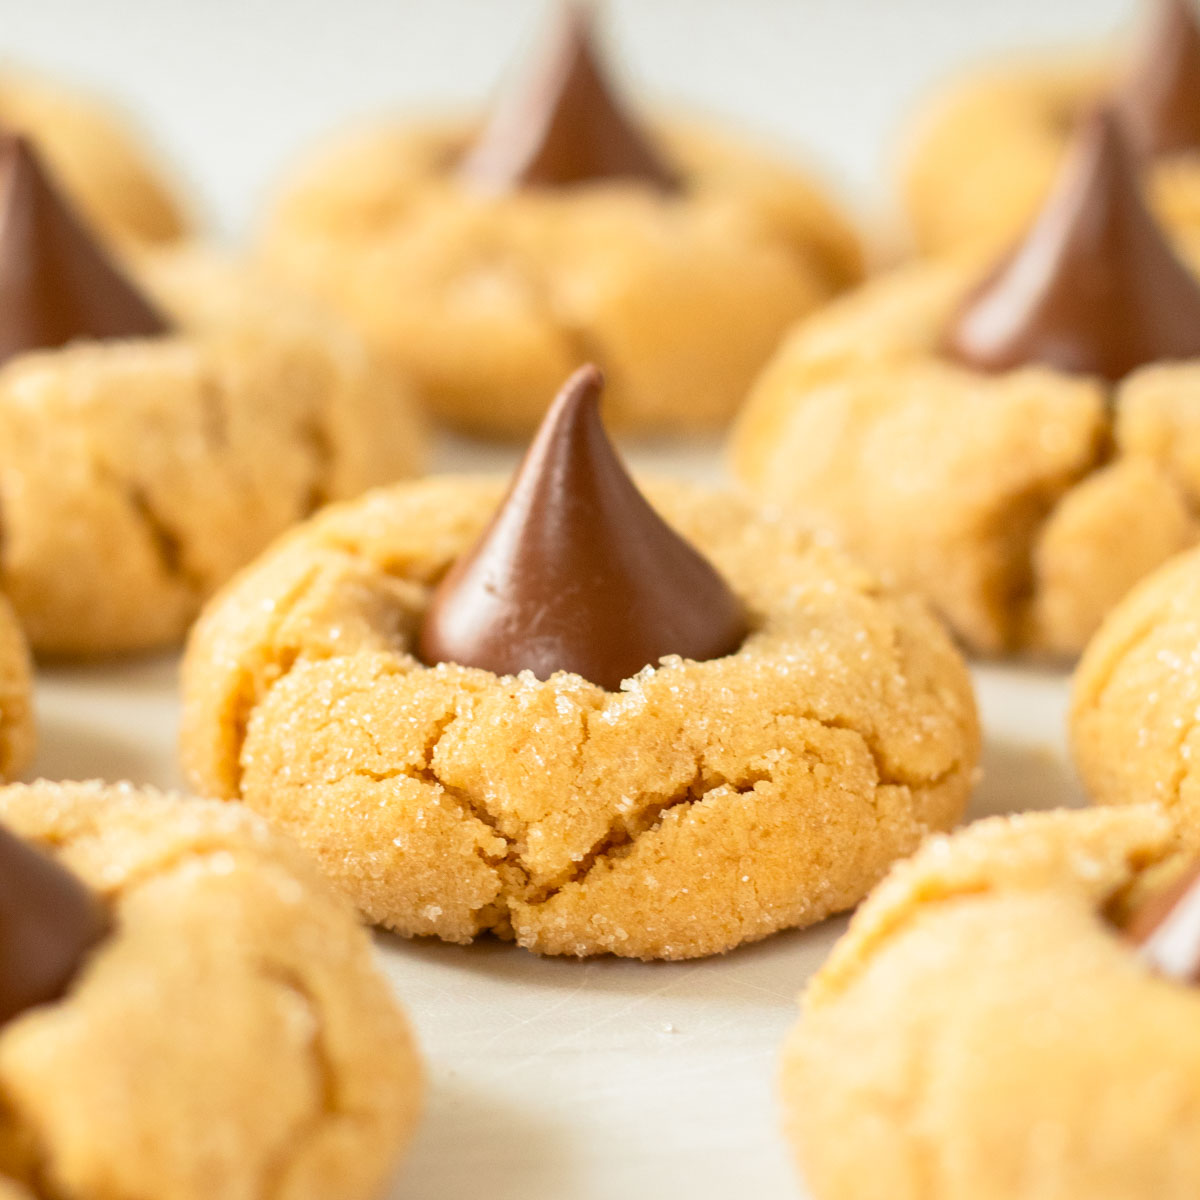 These peanut butter blossoms are a classic Christmas cookie recipe made with a flavorful peanut butter cookie dough rolled in sugar and topped with a chocolate kiss.